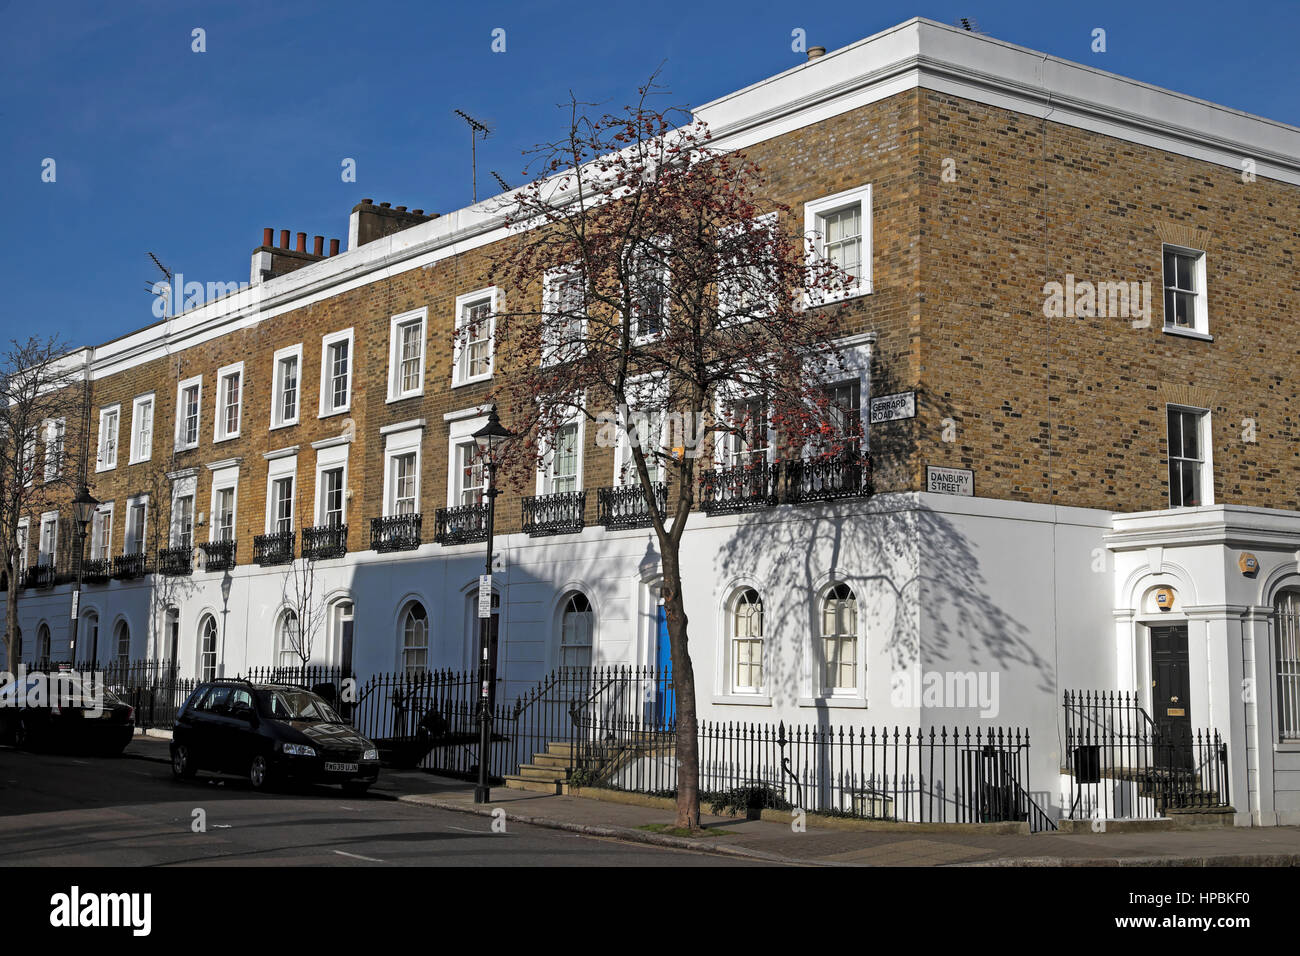 View of row of traditional terraced houses housing in 2017 on Rocliffe Street in Islington London N1 England  UK  KATHY DEWITT Stock Photo